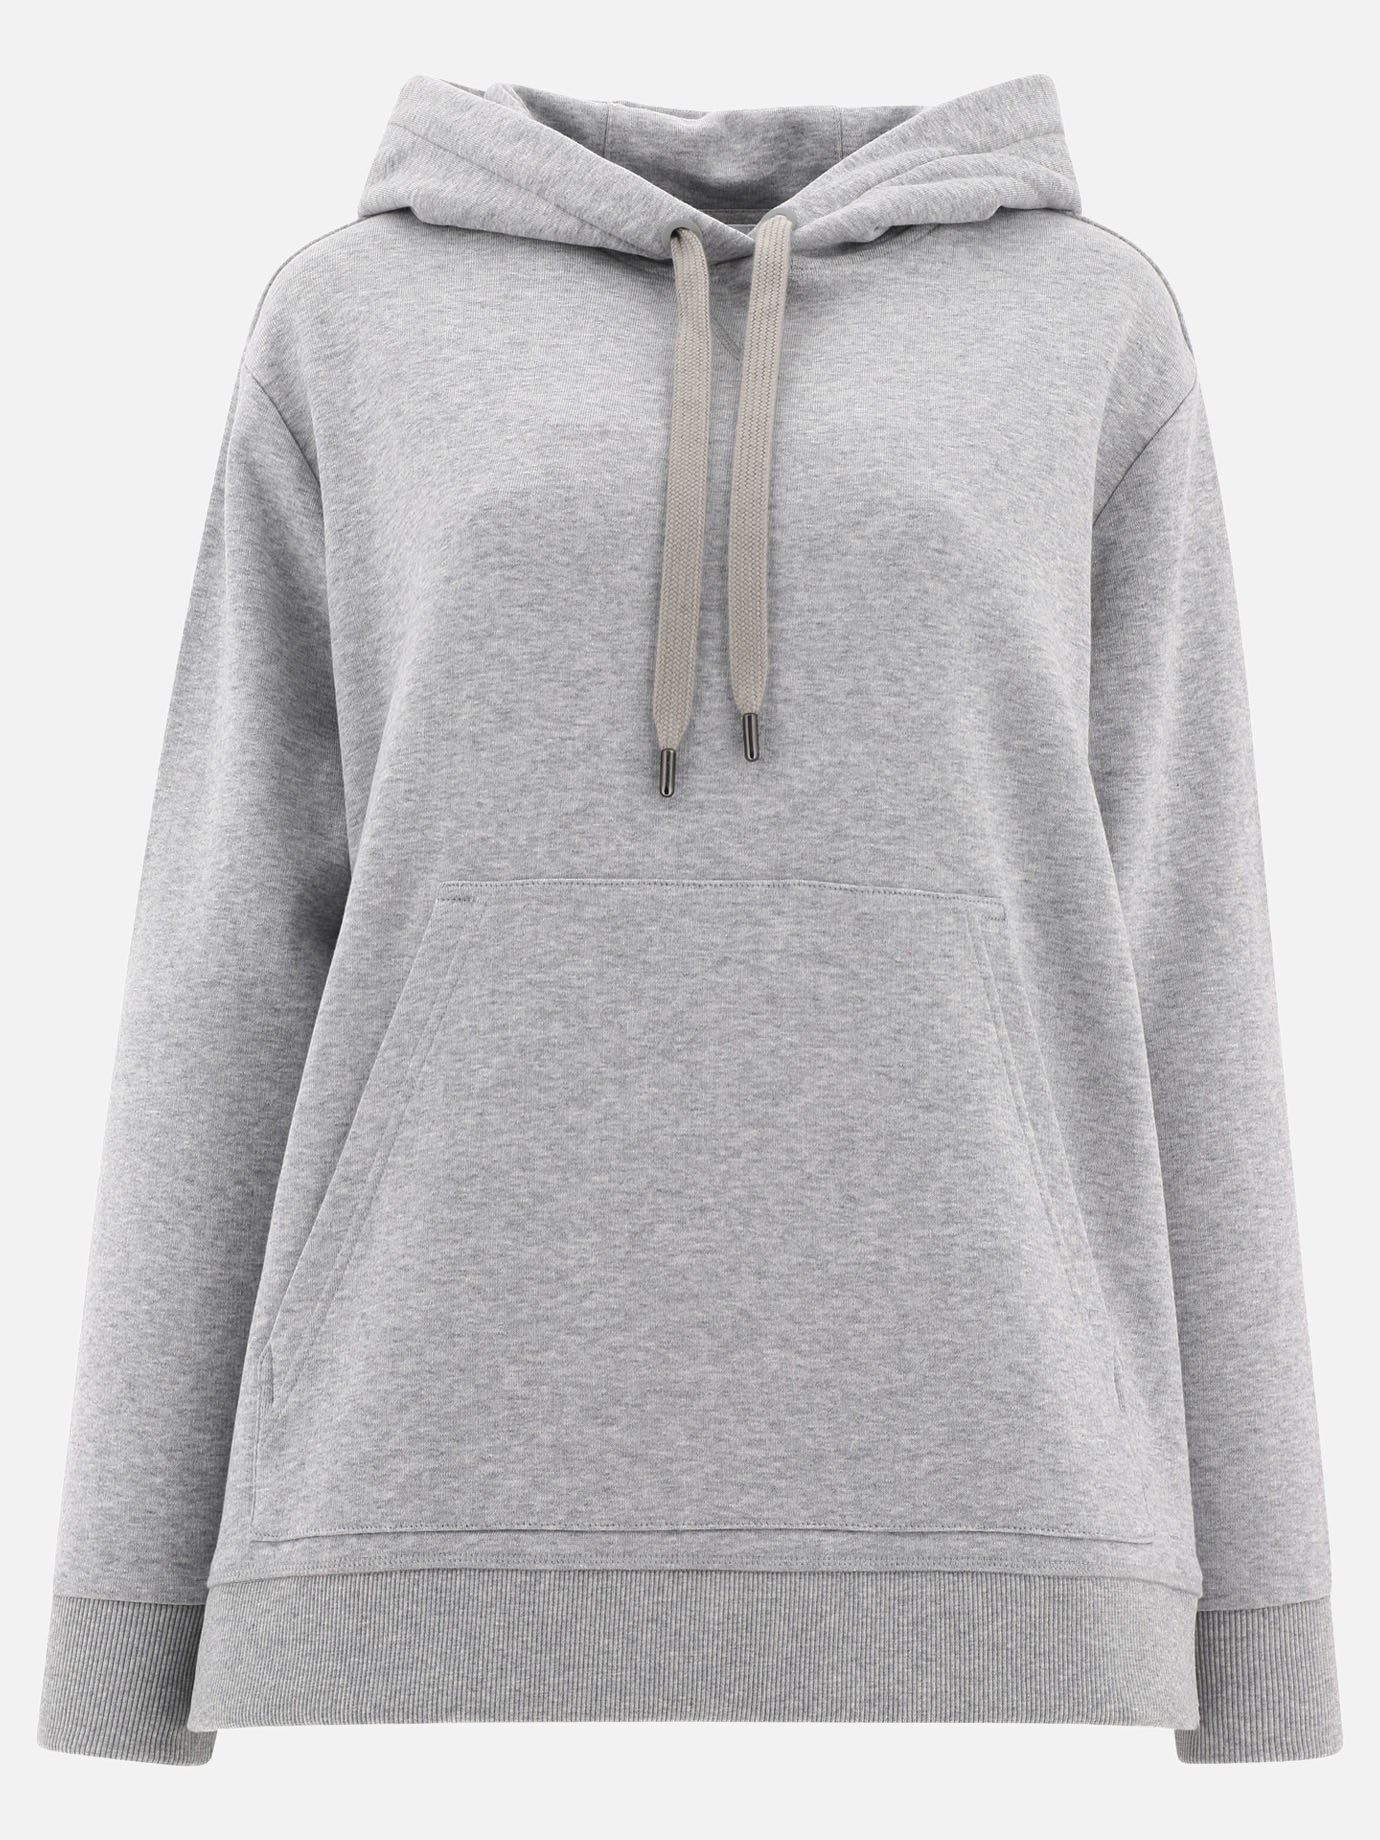  House Check  hoodieby Burberry - 4